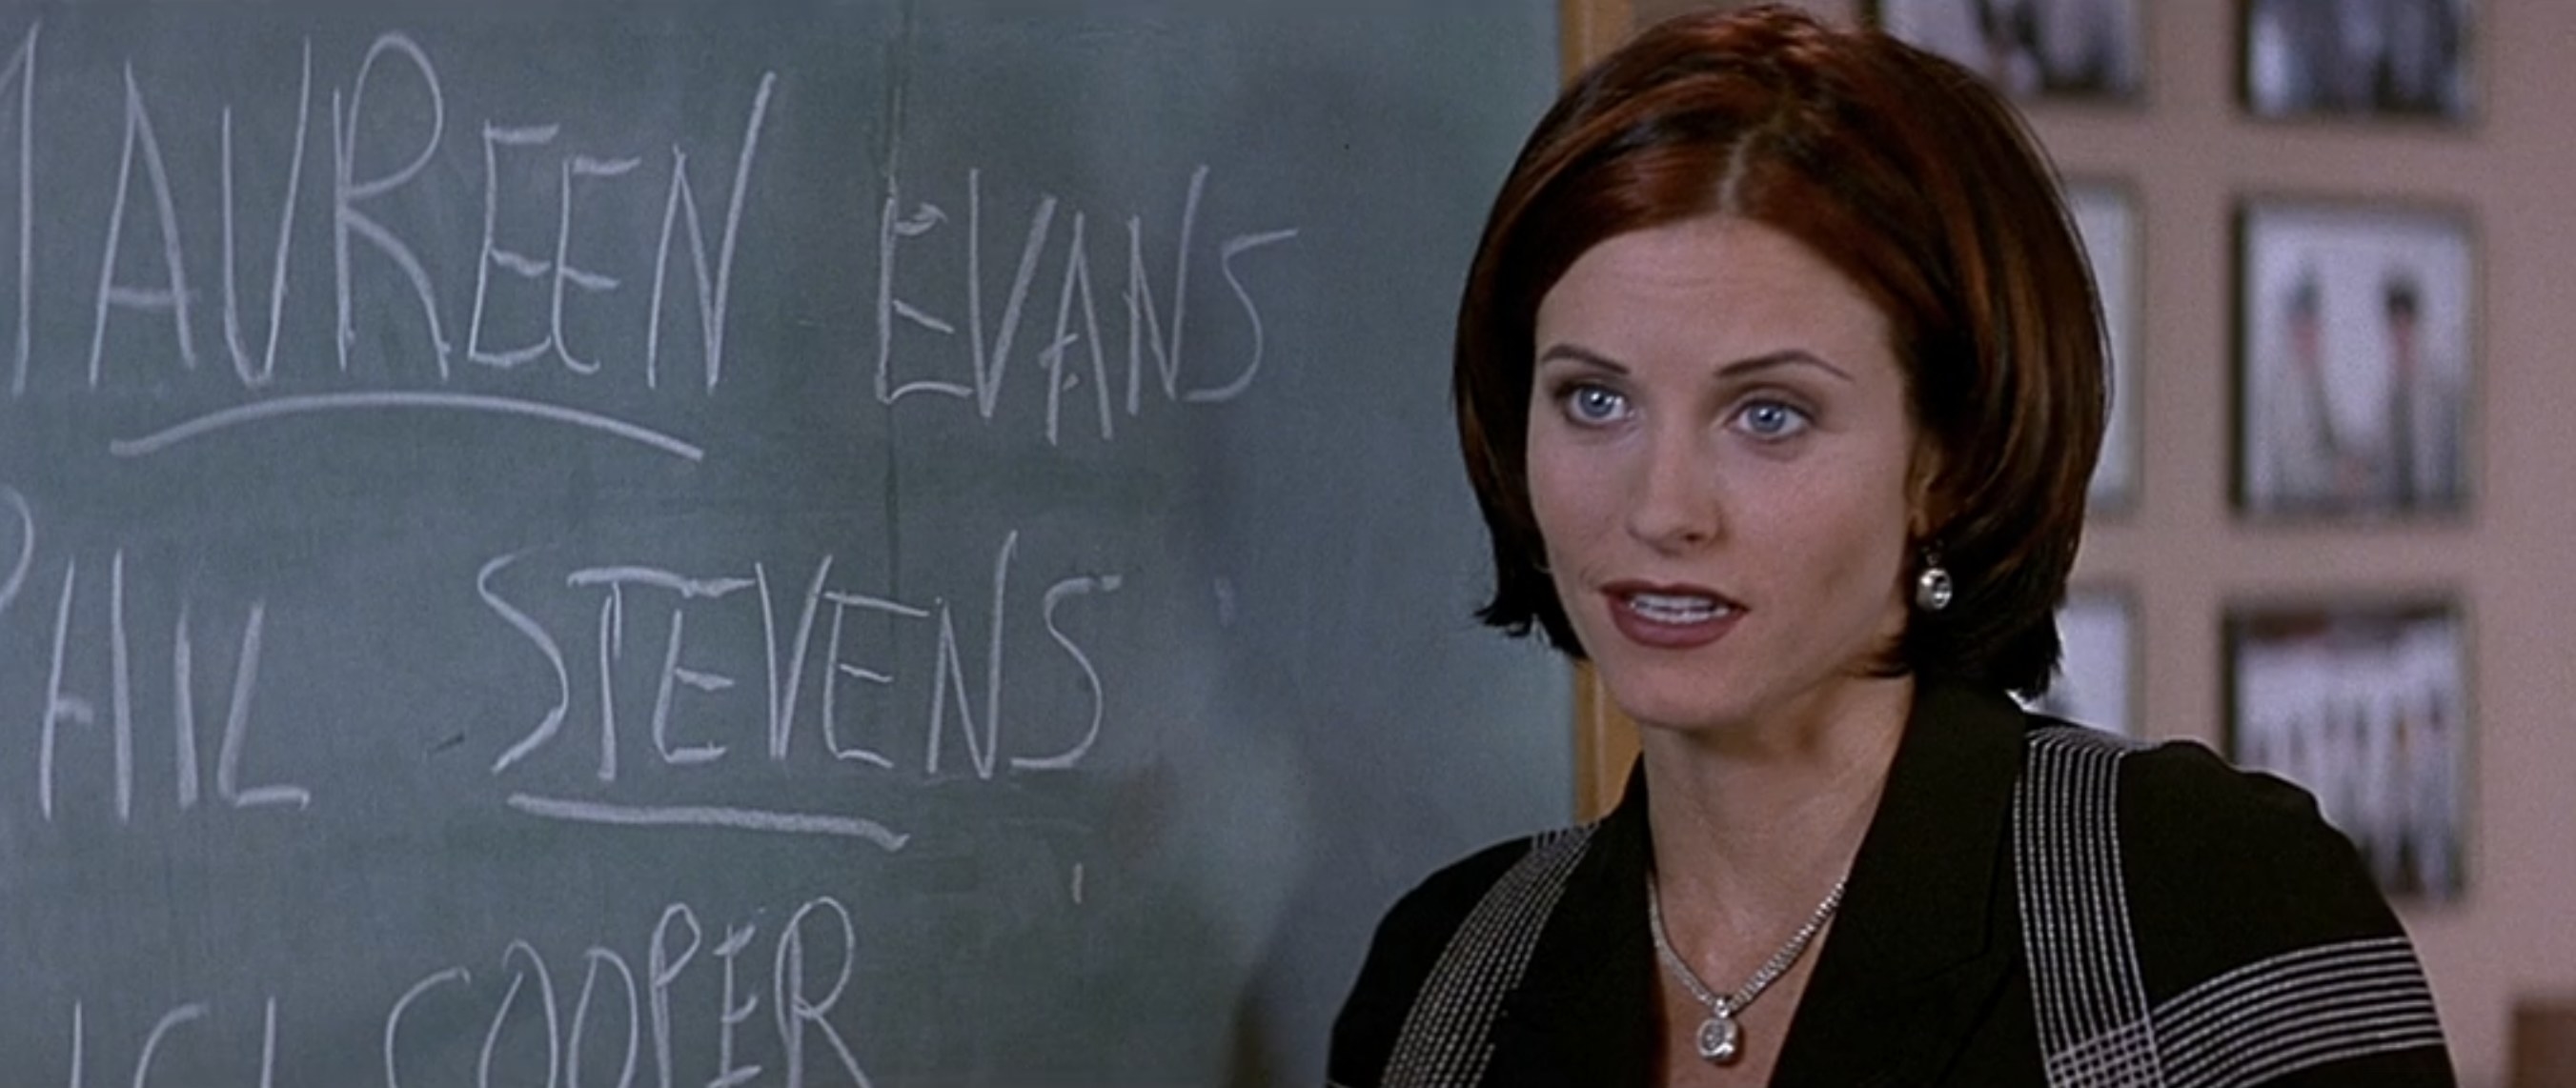 gale with a chalkboard that says maureen evans phil stevens and cici cooper in scream 2